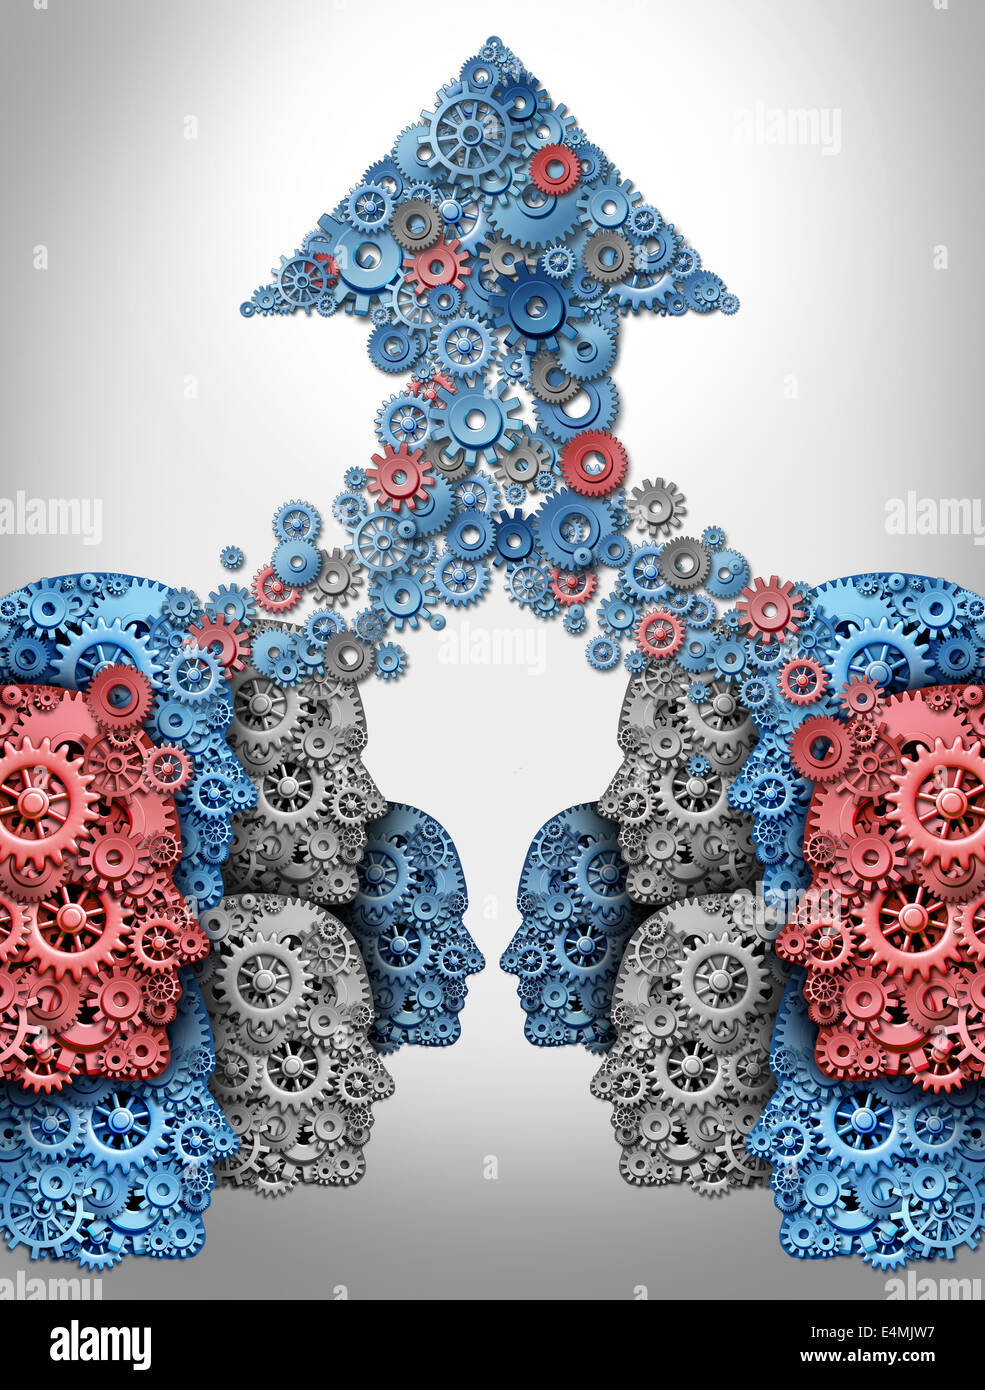 Crowdsourcing technology internet concept and crowdfunding financial symbol as a group of human heads made of machine gears supporting a new business venture with social networking funding cooperation resulting in an upwards arrow for success. Stock Photo